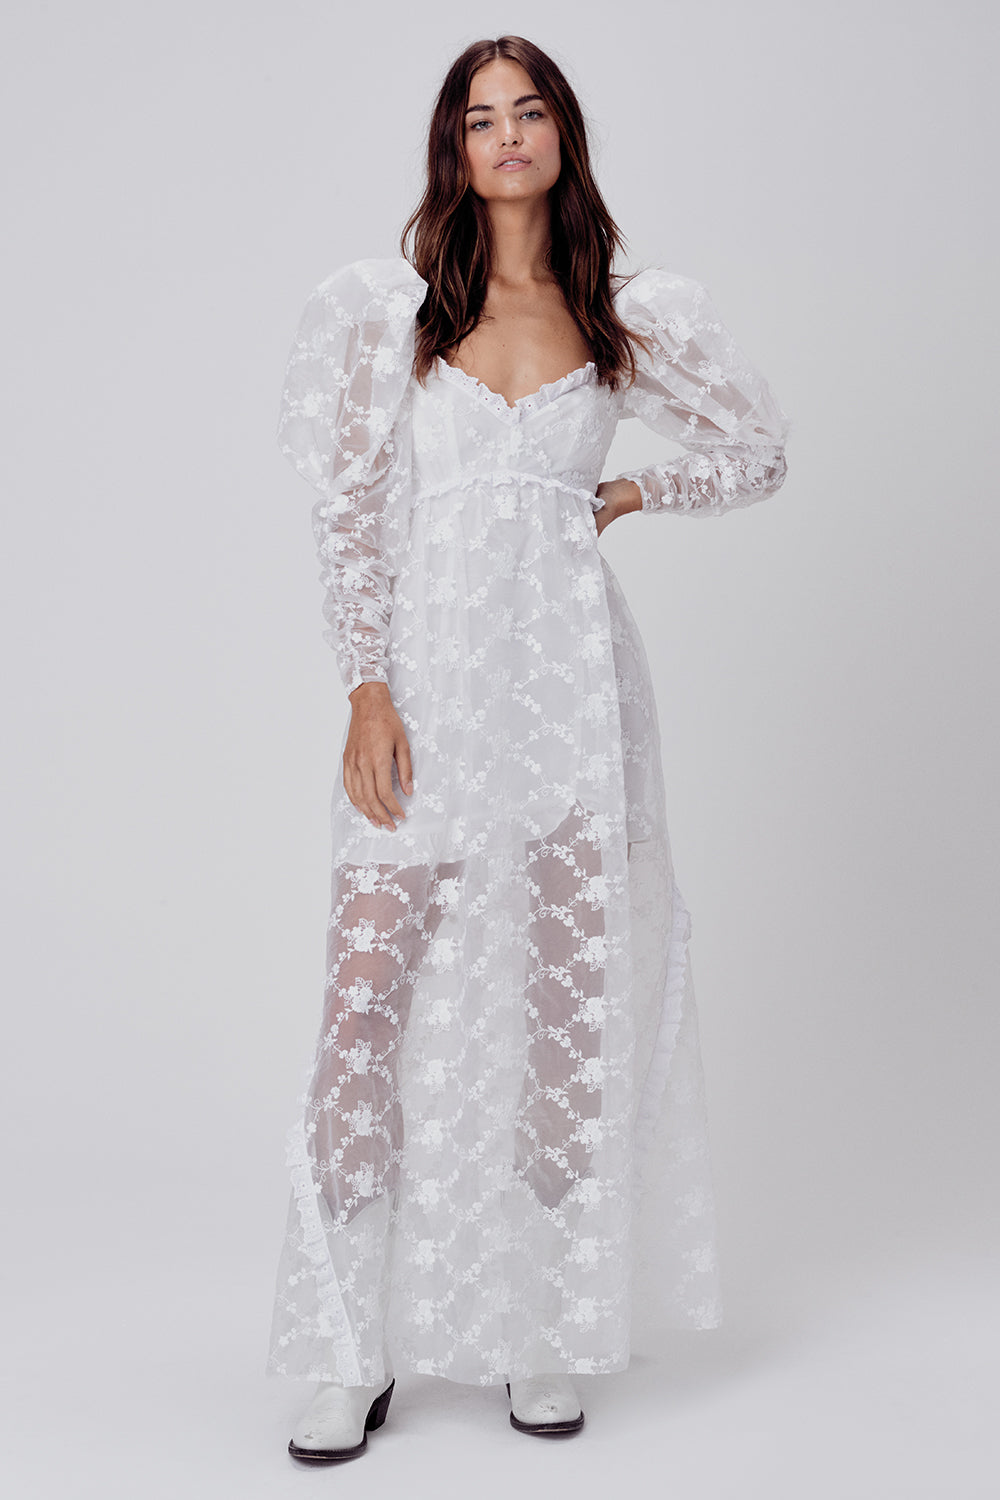 for love and lemons white lace dress